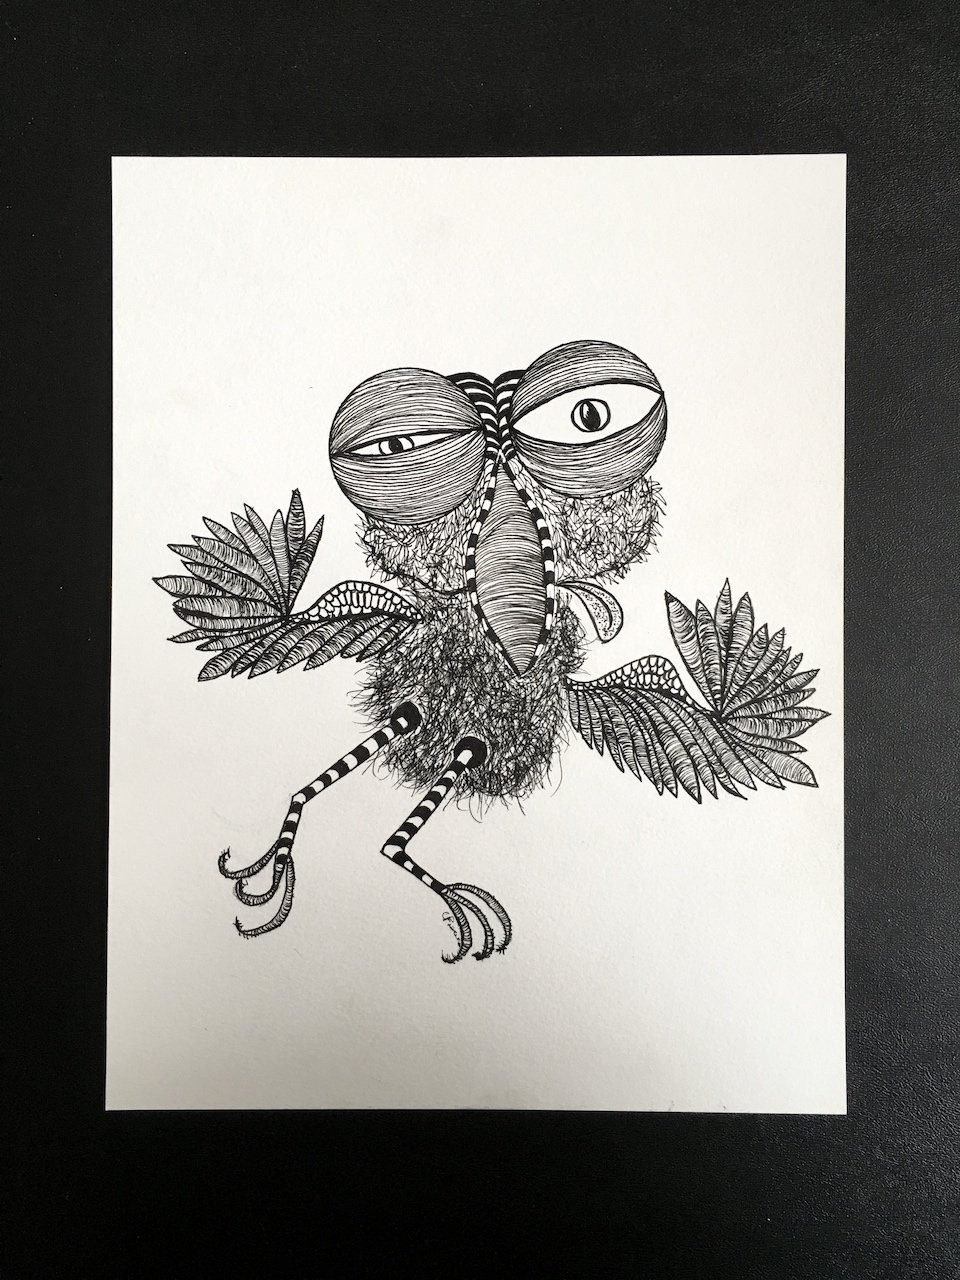 Get the Bird Out drawing number 5 by Charly Fasano.